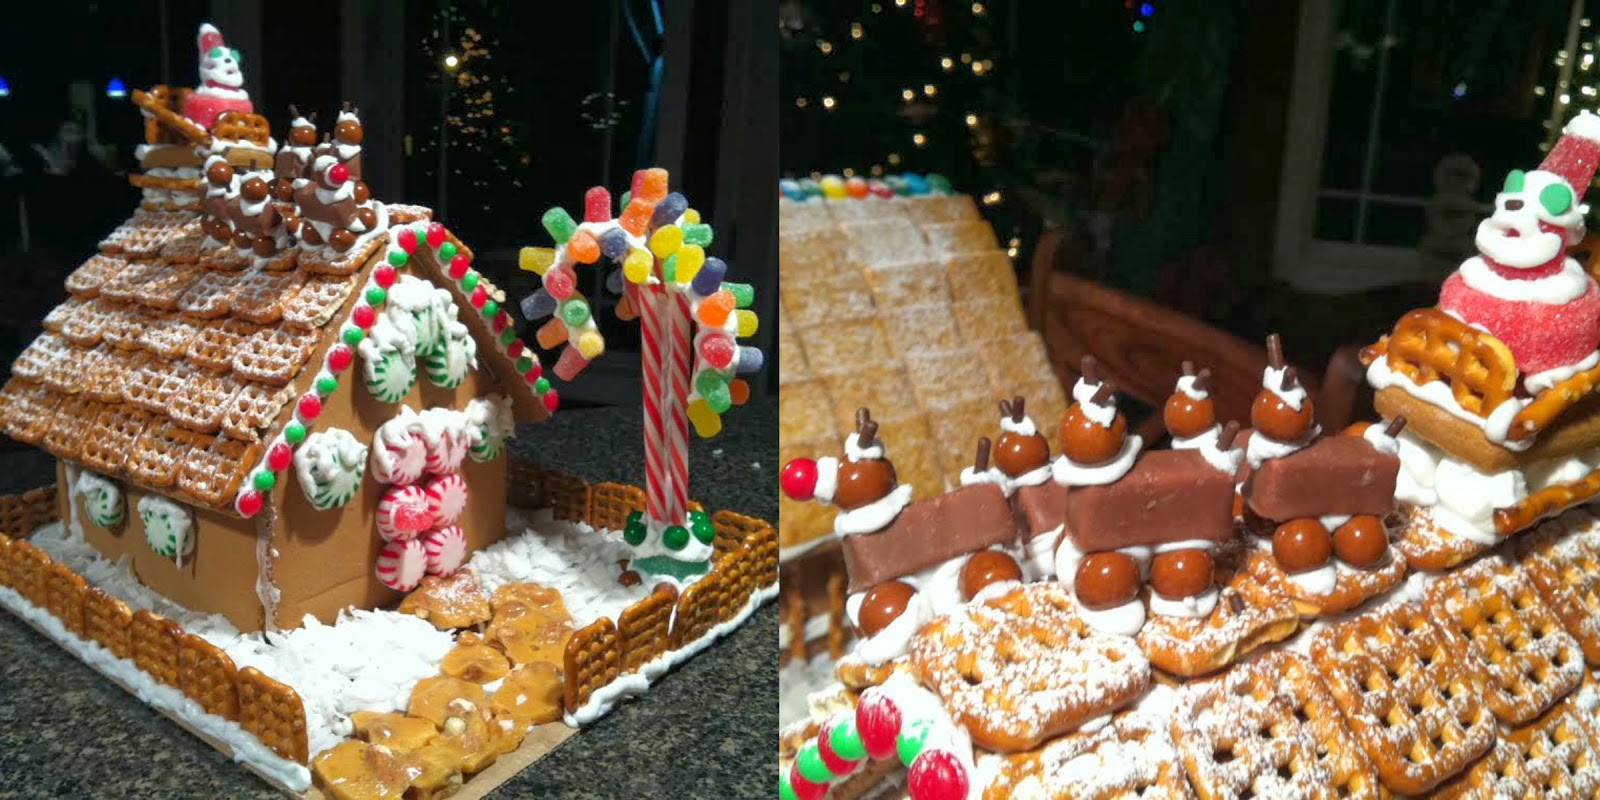 Gingerbread House, Classic Gingerbread House with Santa and Reindeer, Gumdrop Tree